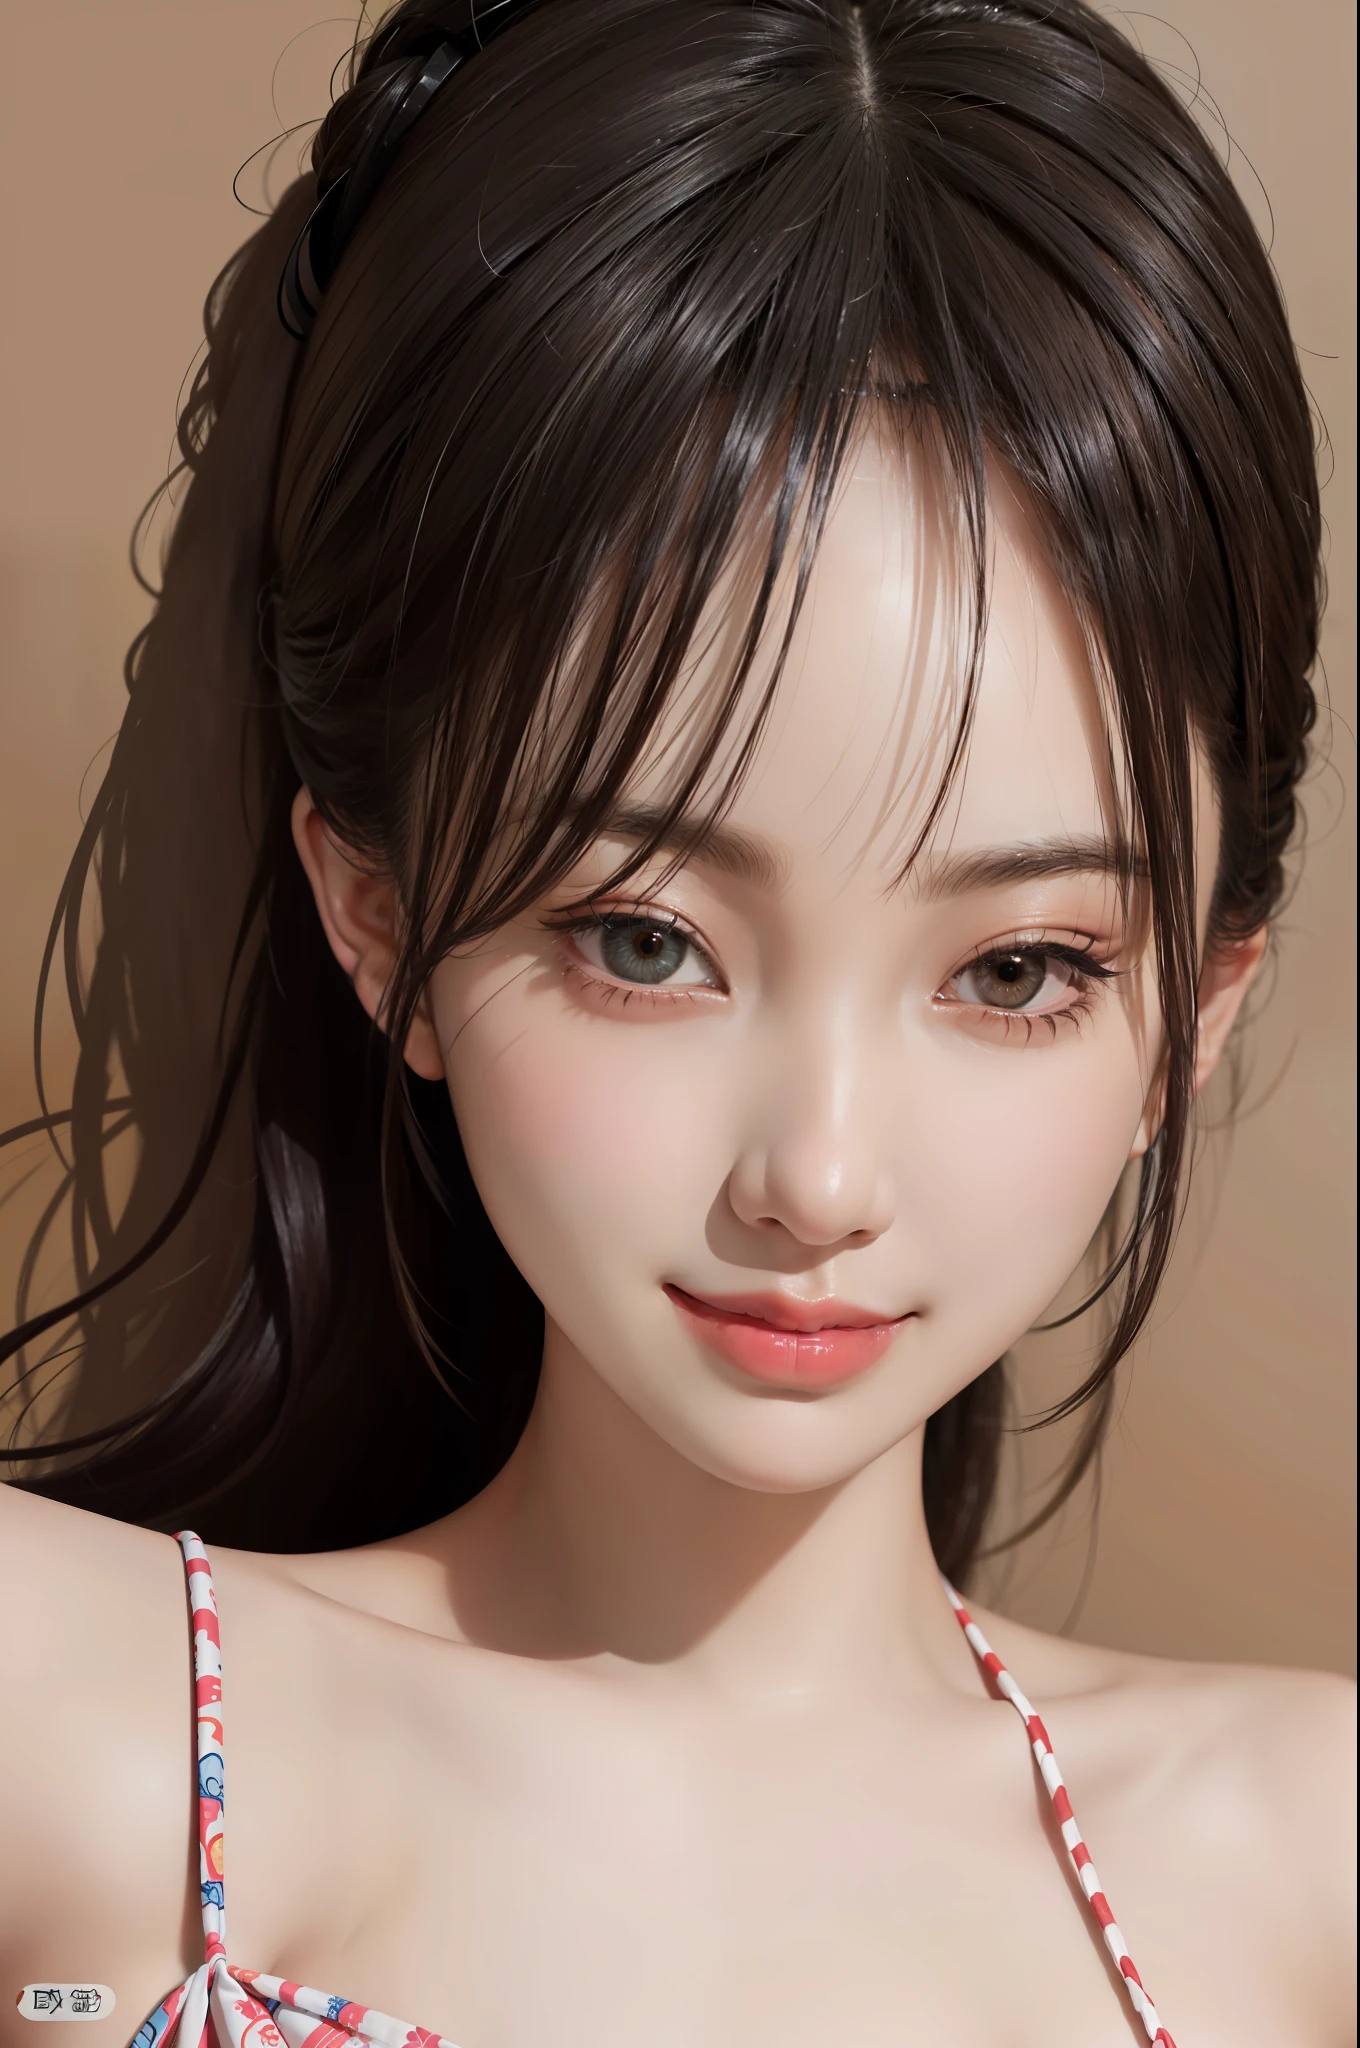 Masterpiece, Best Quality, Portrait of 1girl,Korean woman,(Masterpiece, Pretty person,Polluted smile),Virtual YouTube,Detailed skin texture, Detailed cloth texture, Beautifully detailed face, Masterpiece, Clavicle,